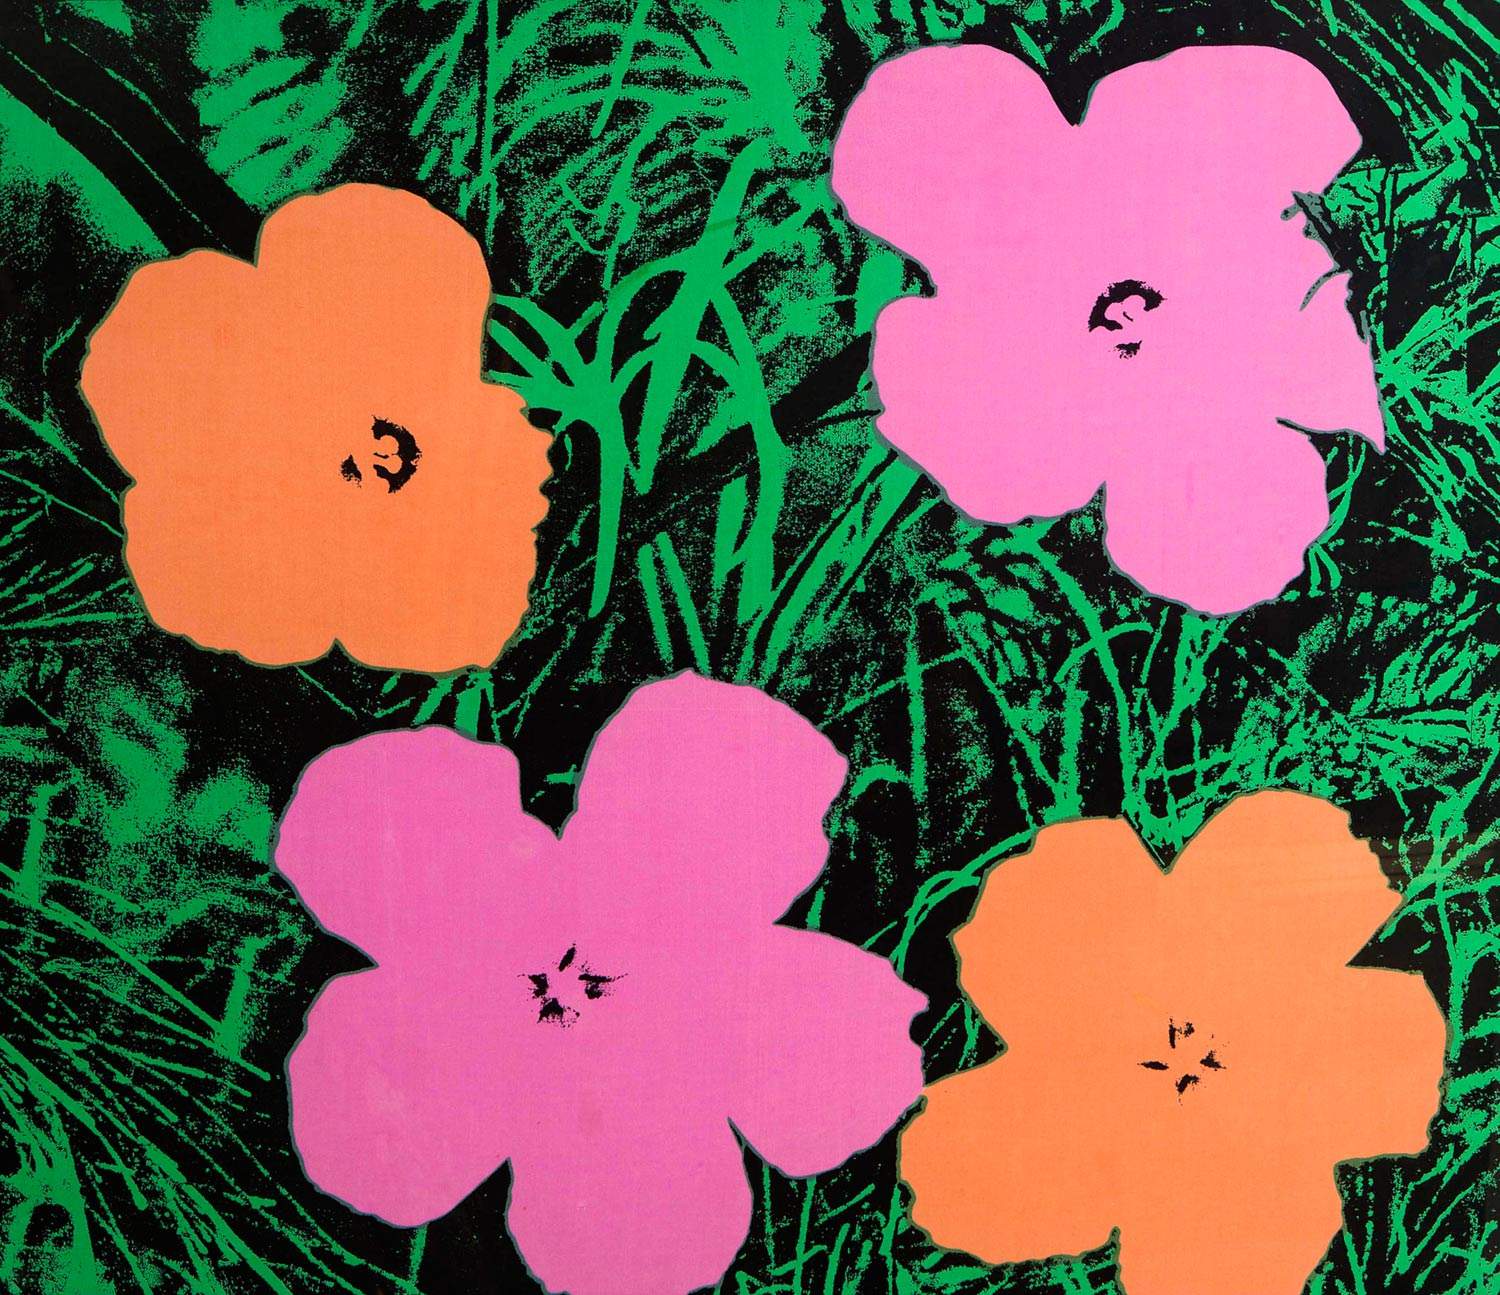 Milan, a major exhibition on Andy Warhol curated by Bonito Oliva in autumn